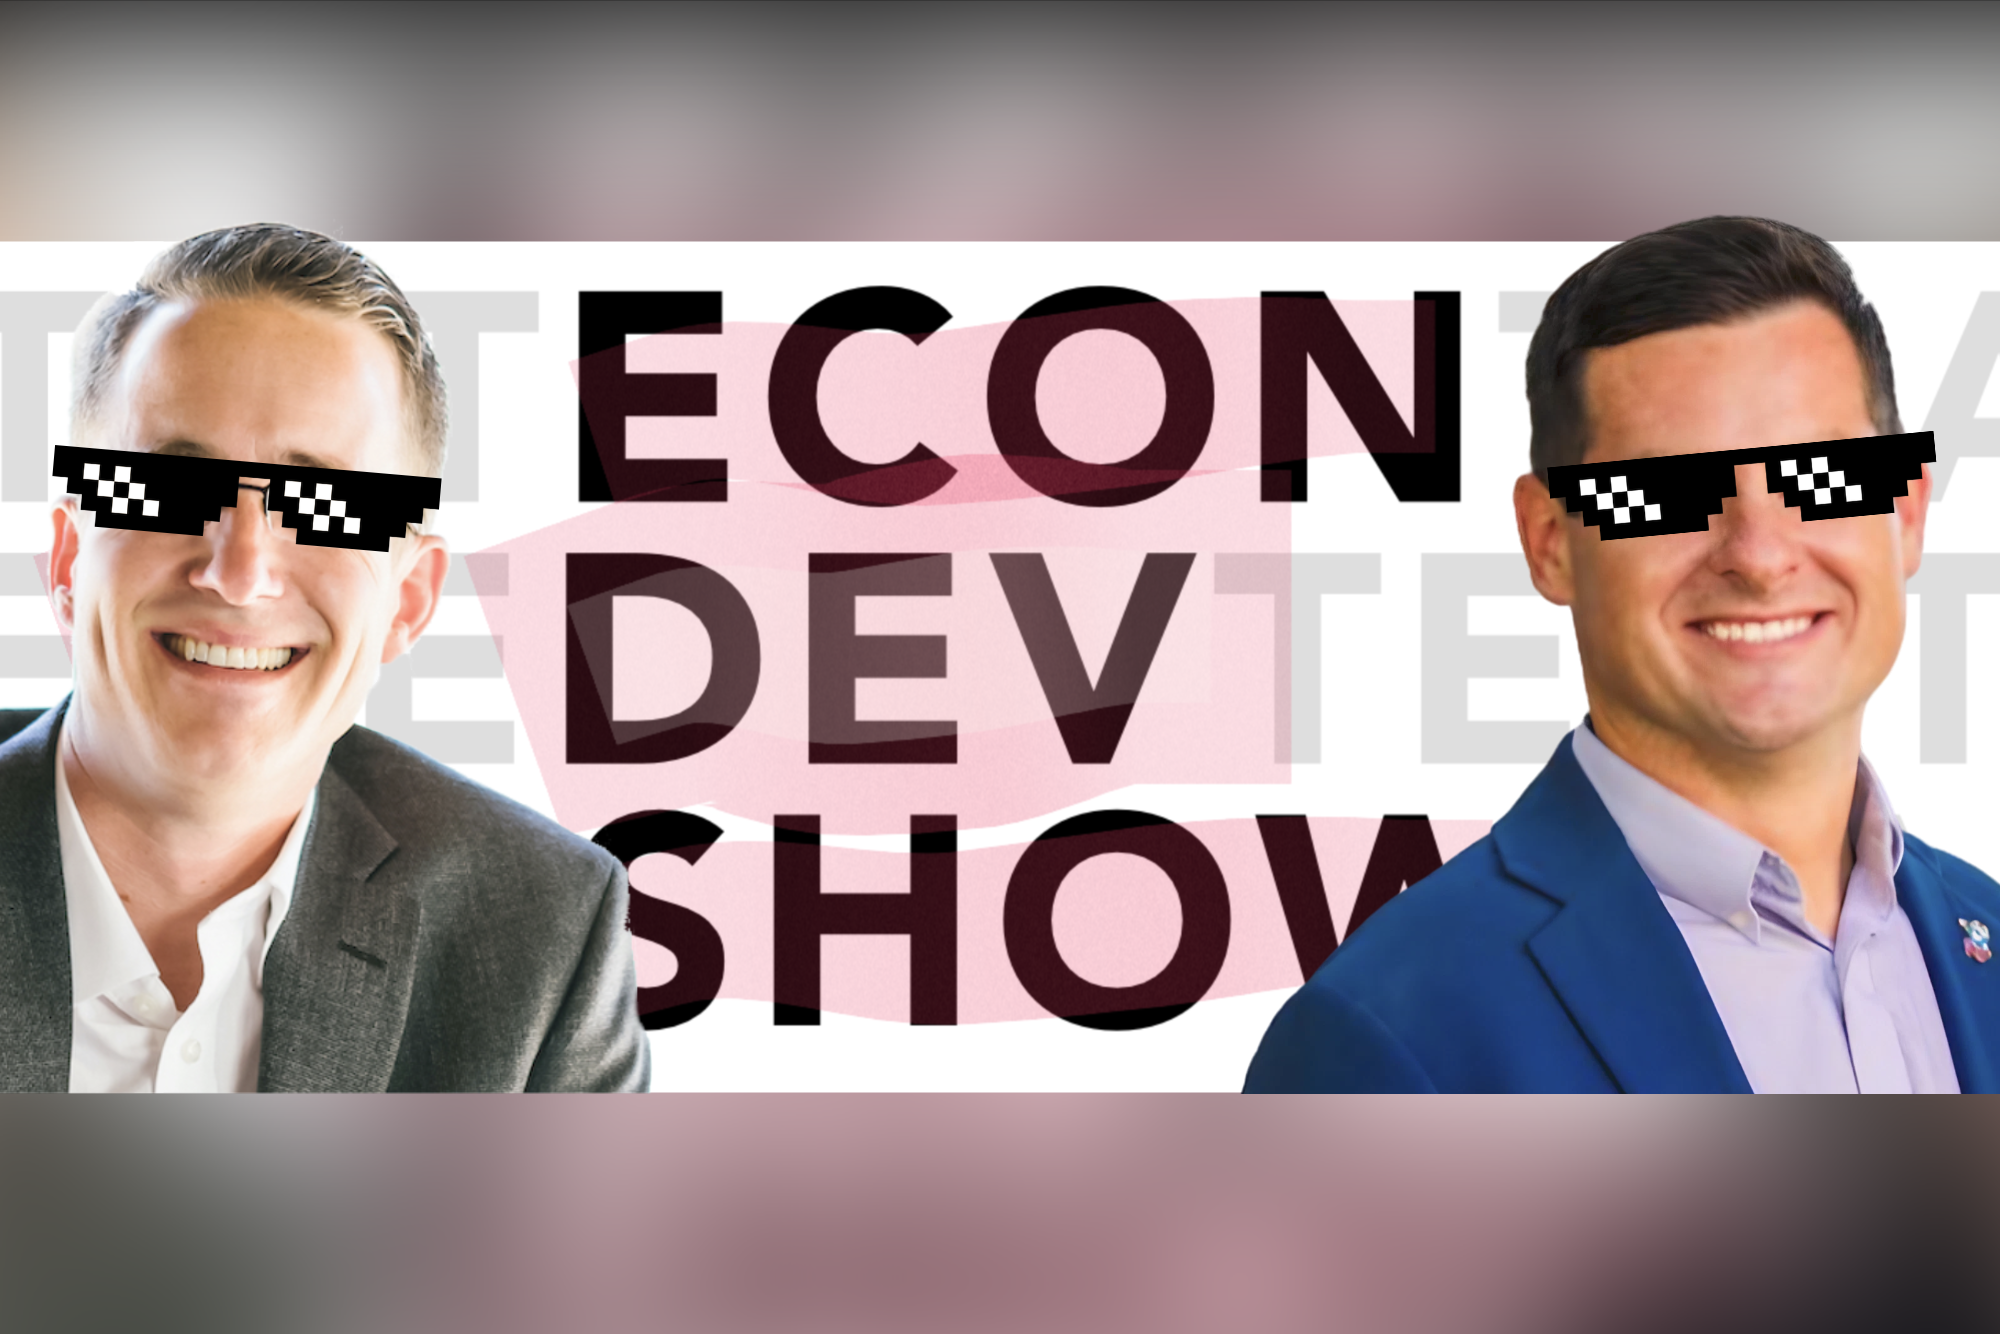 Podcast Episode # 105 - Fusing Memes, AI, and Economic Development in Georgia With Ben McDaniel